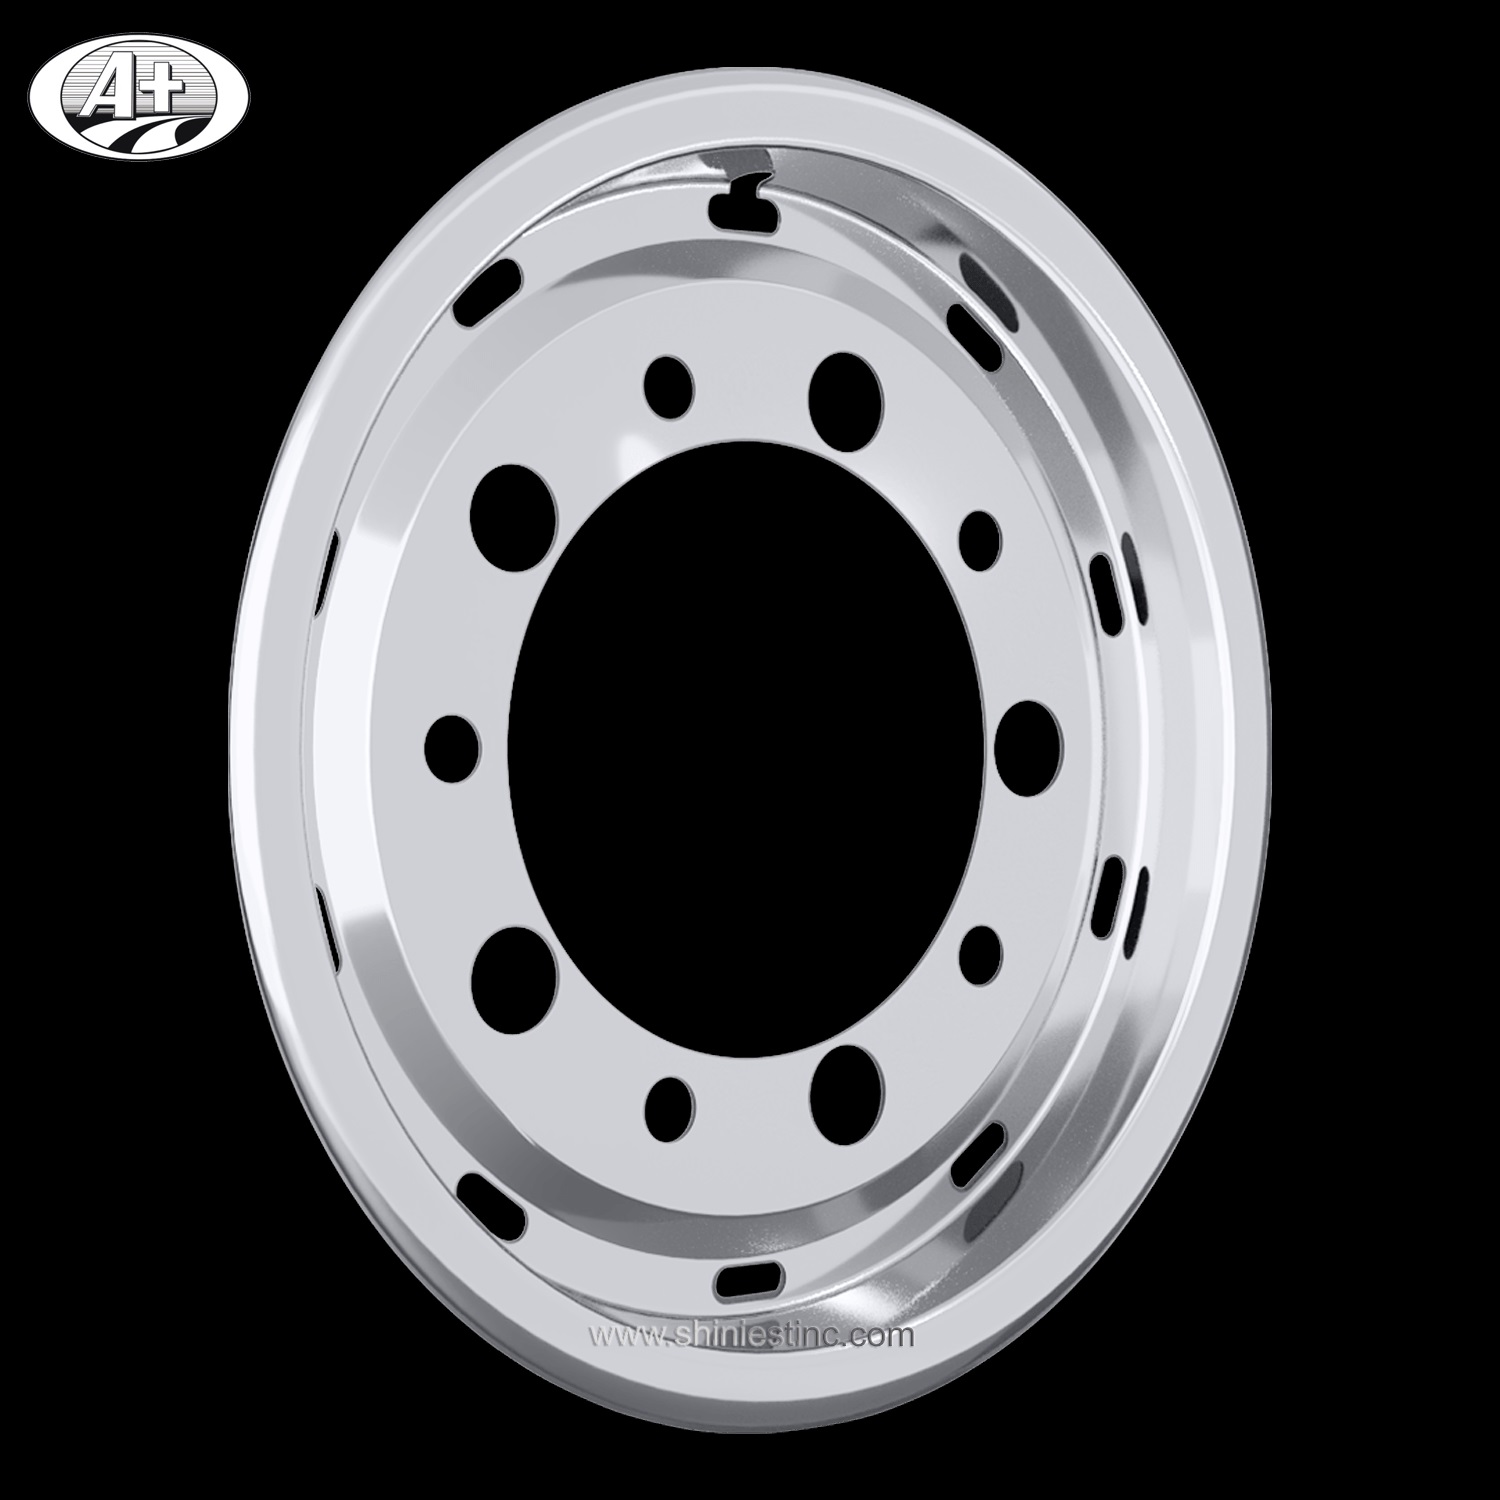 (71225S-135A) 22.5＂x 11.75＂S/S Wheel Liner for Super Single Wheel for Iveco, Scania